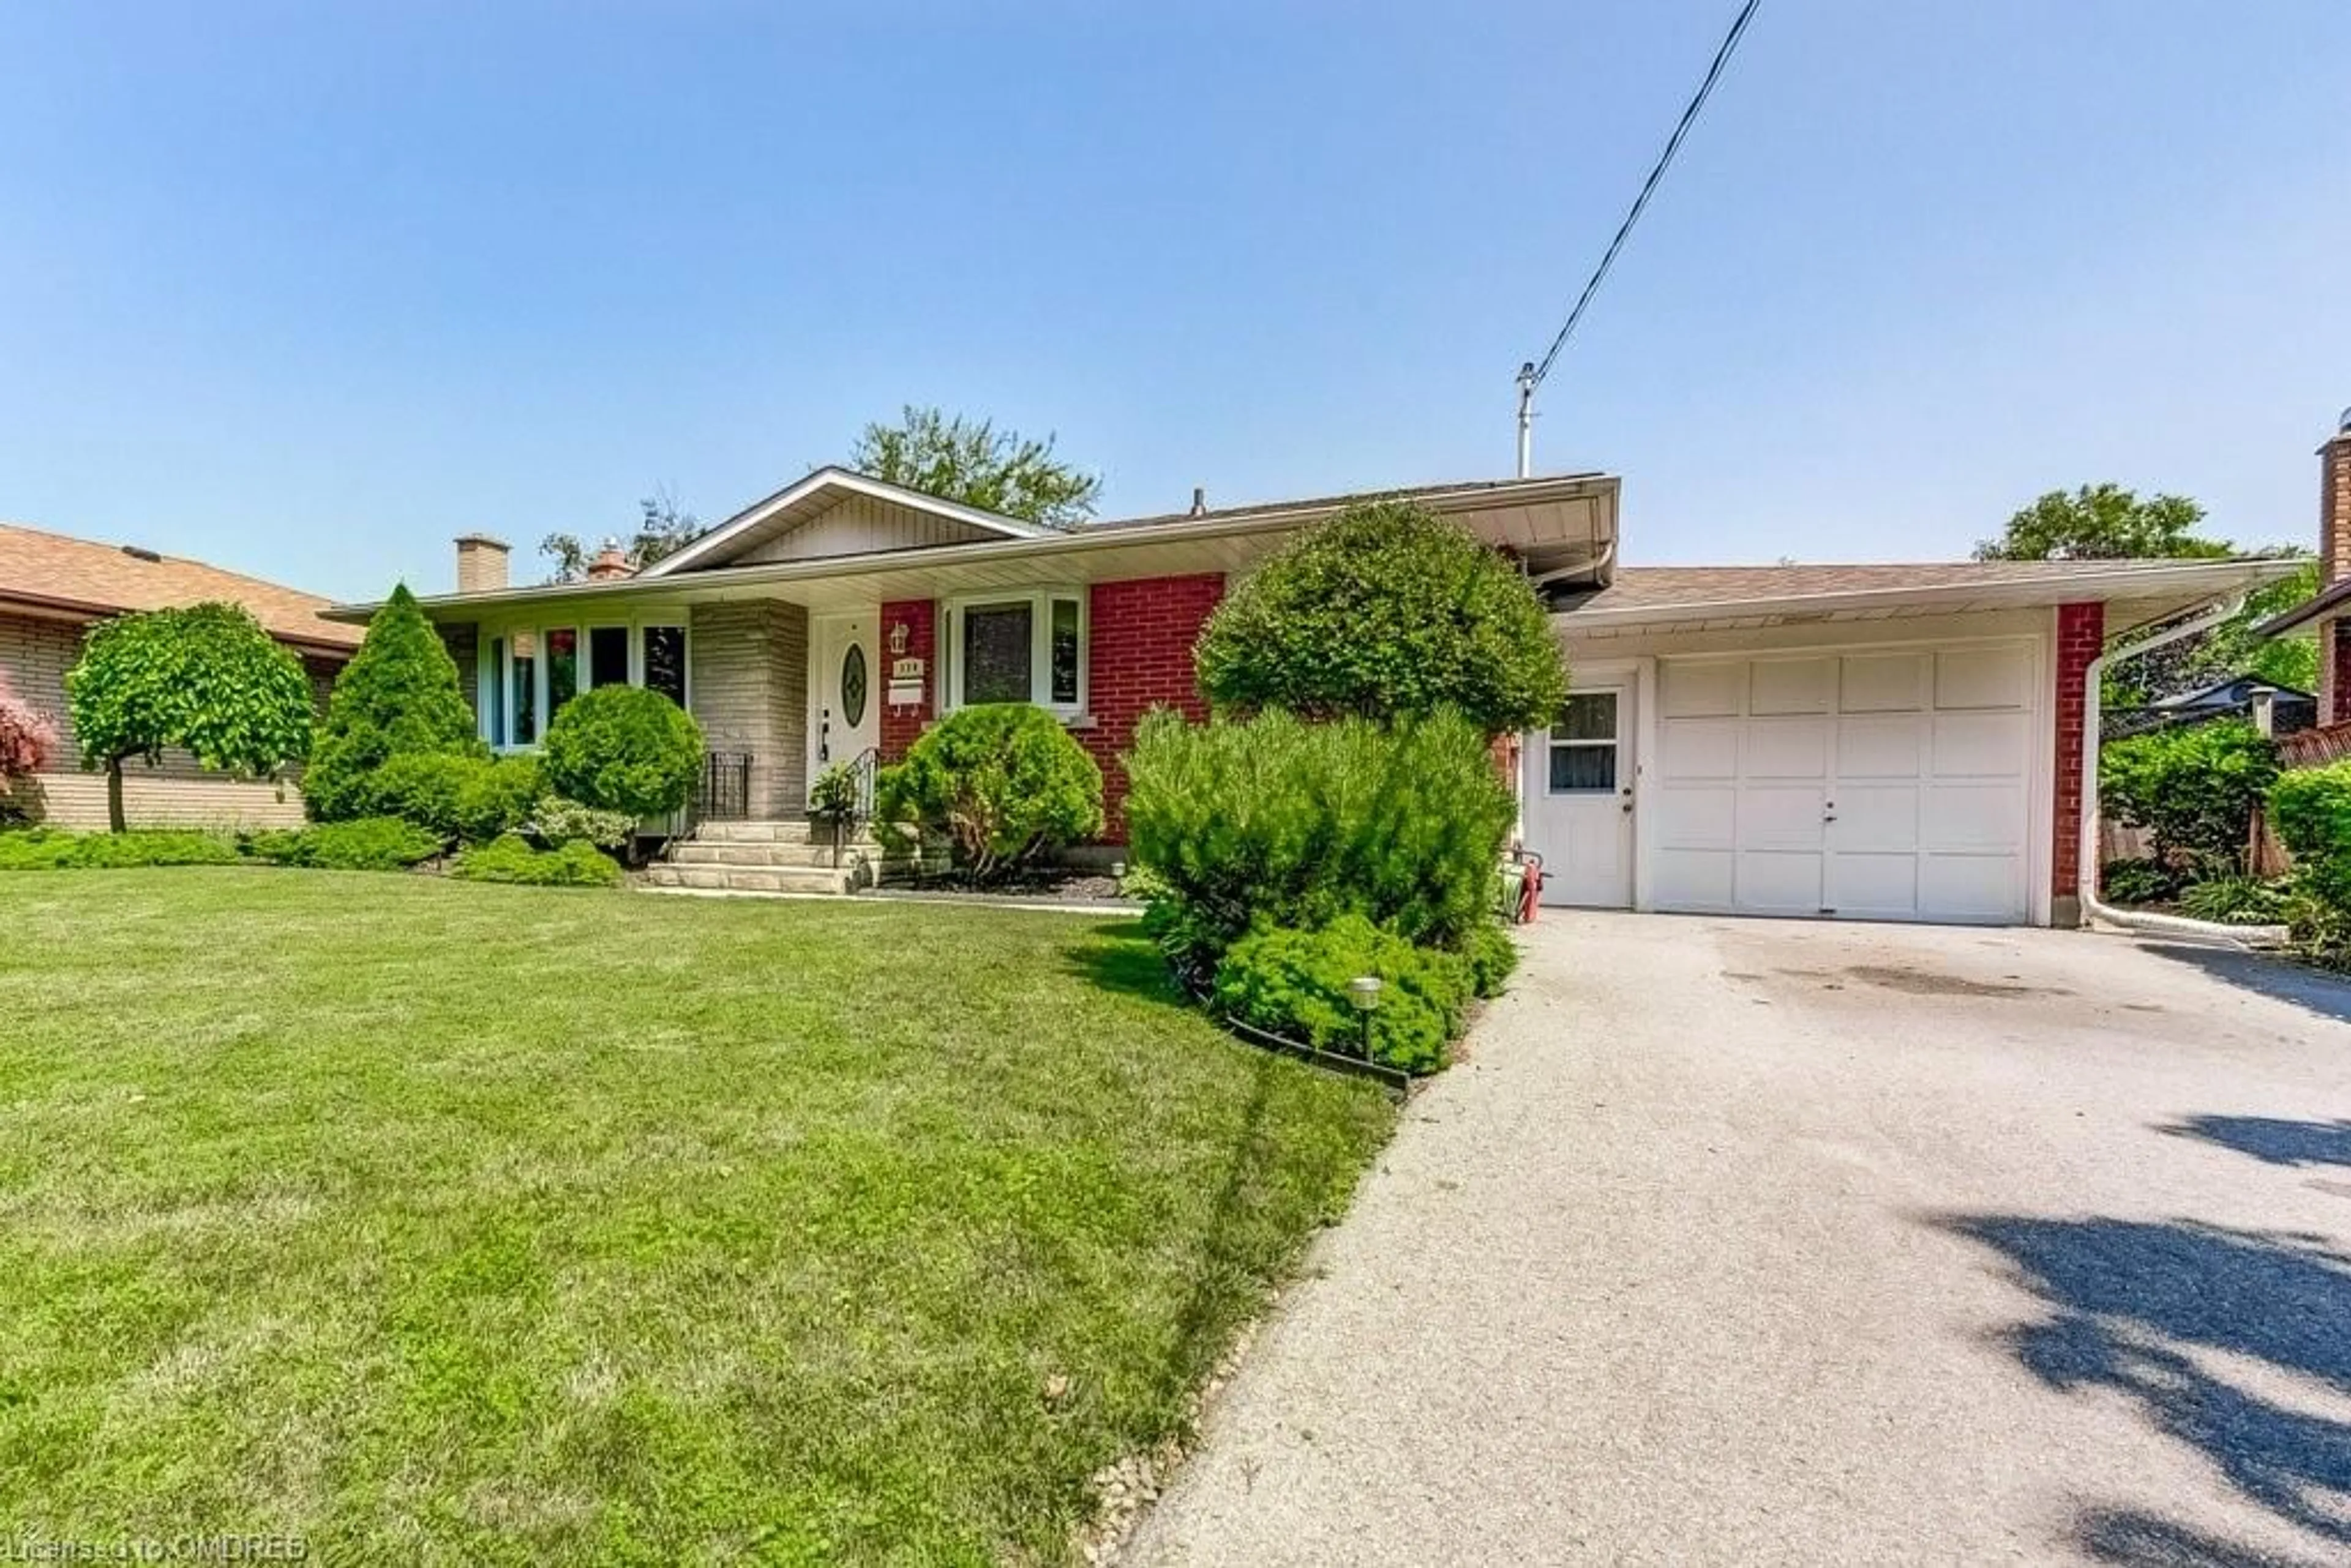 Frontside or backside of a home for 124 Windward St, St. Catharines Ontario L2M 4C6